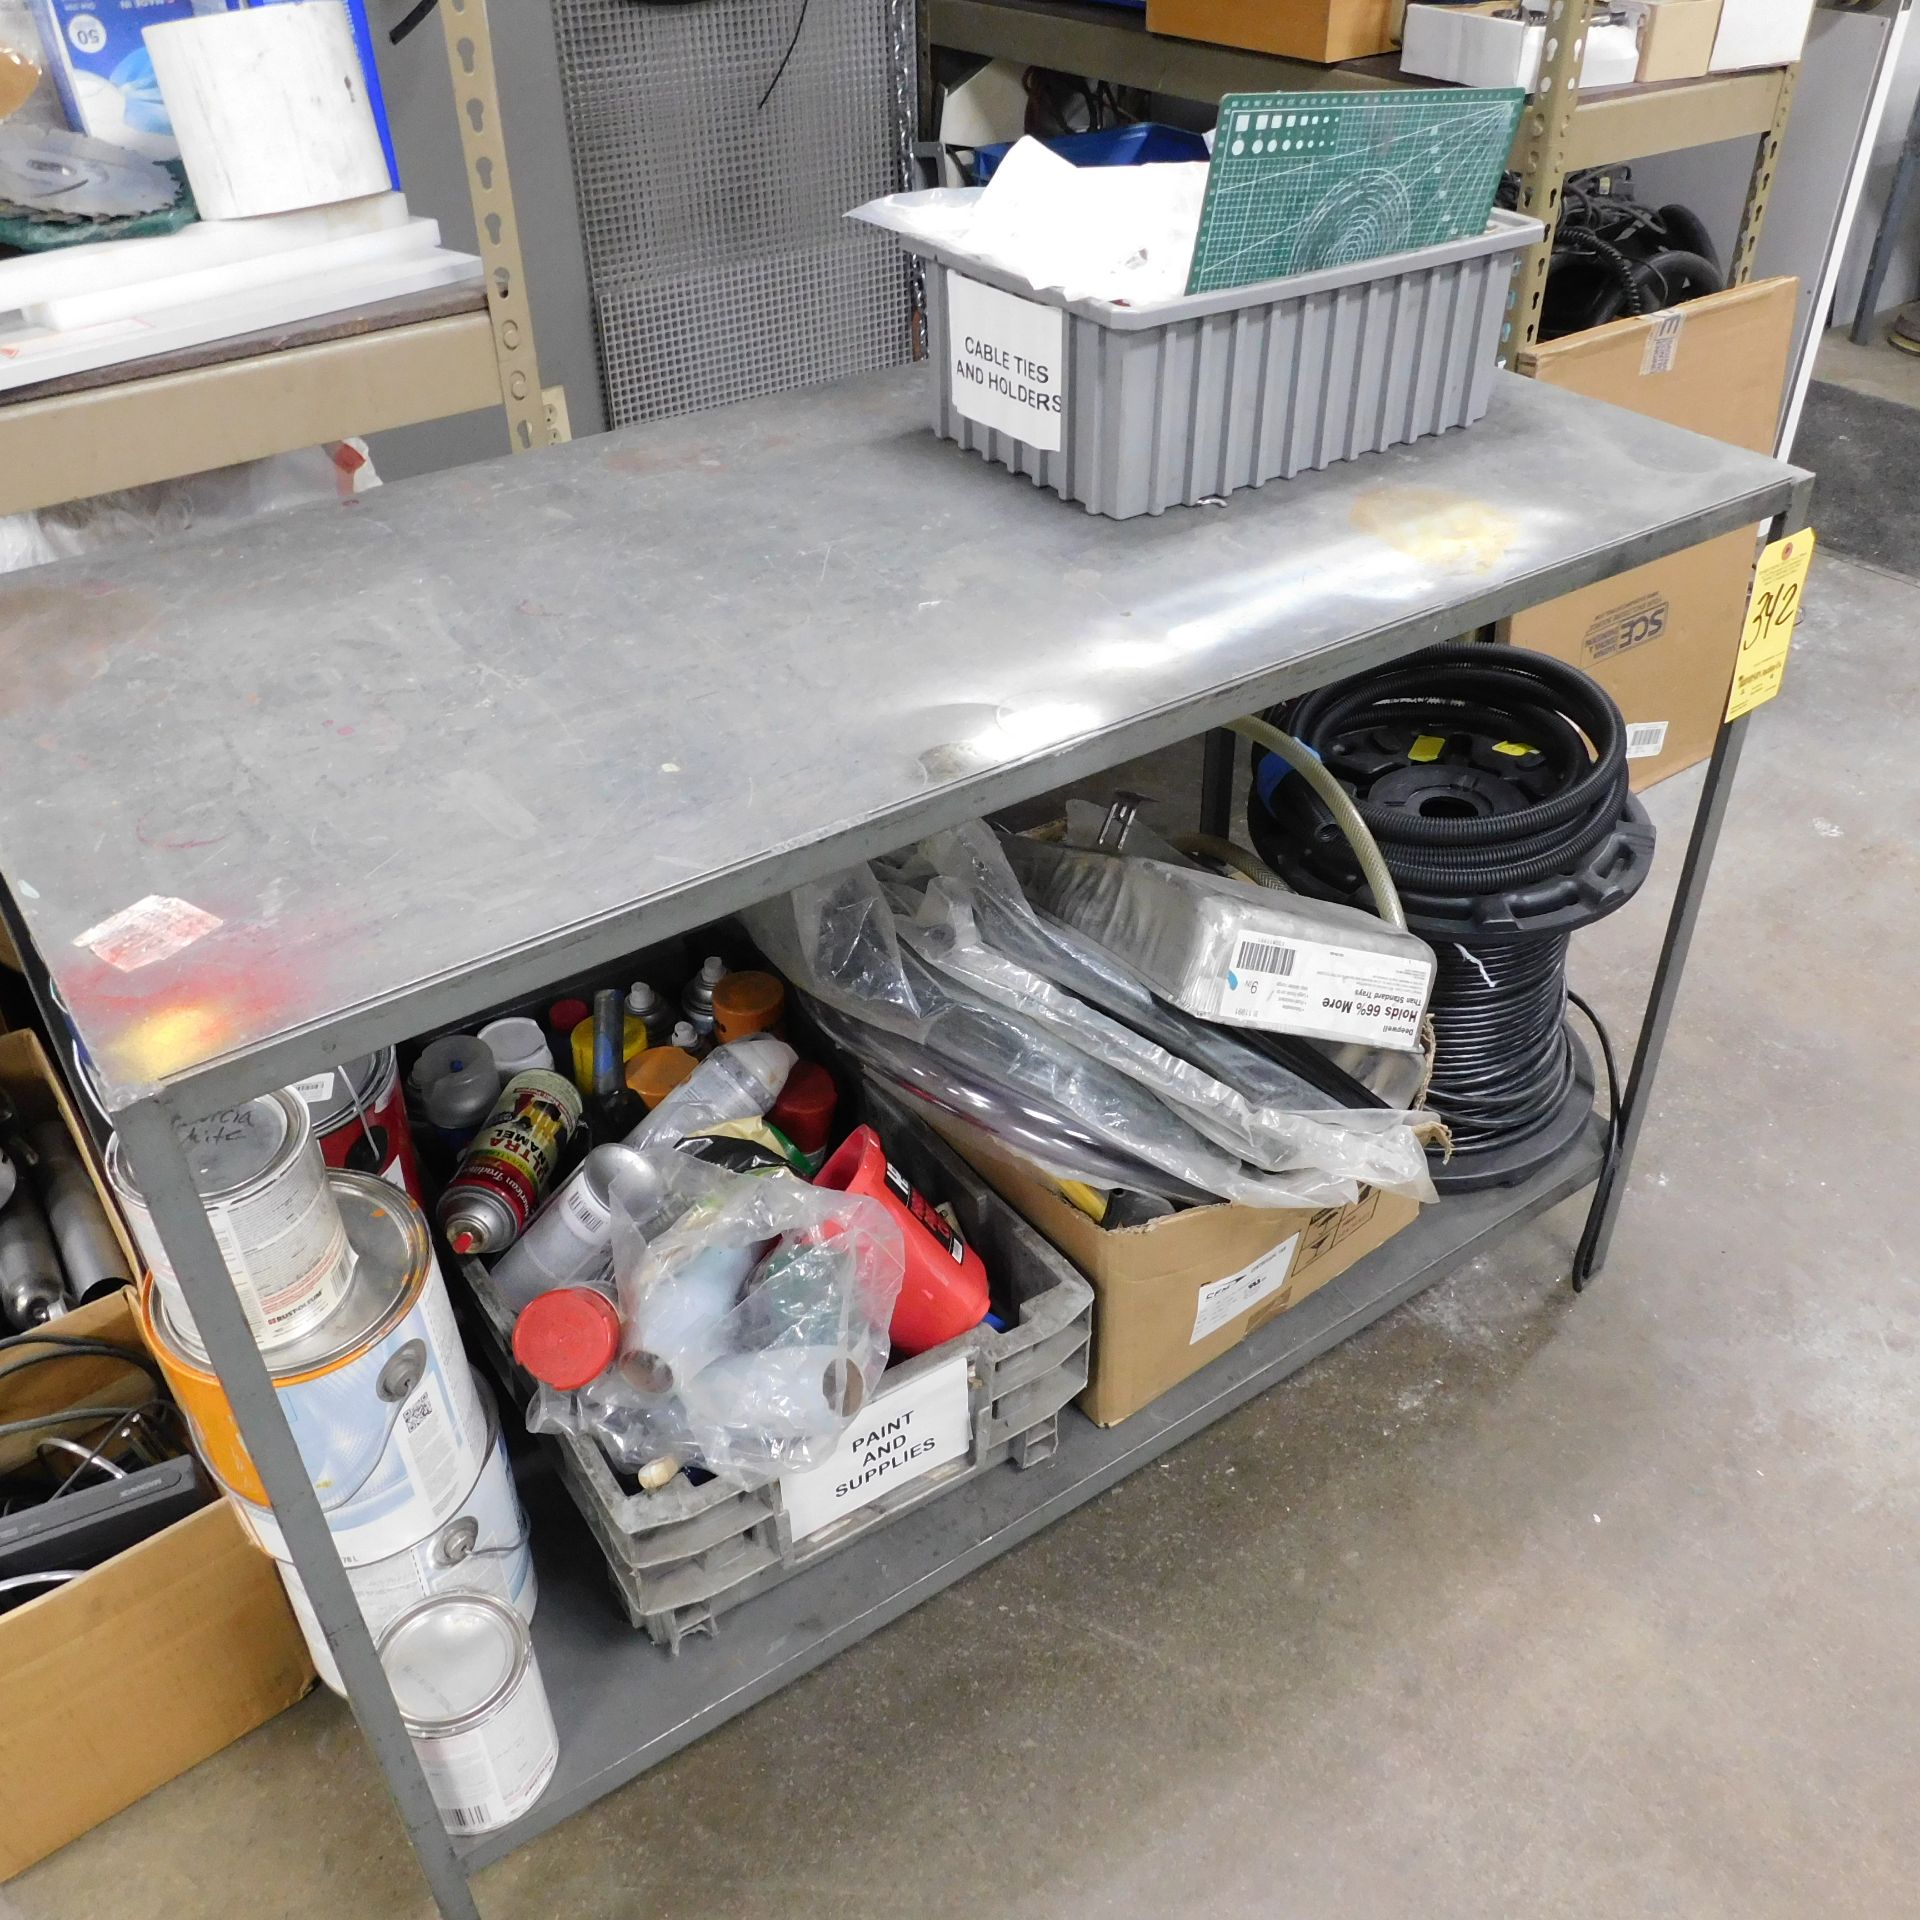 (2) Sections Metal Shelving, 48" X 72" X 18 1/2" Deep, with All Contents of Maintenance Items, etc. - Image 6 of 8